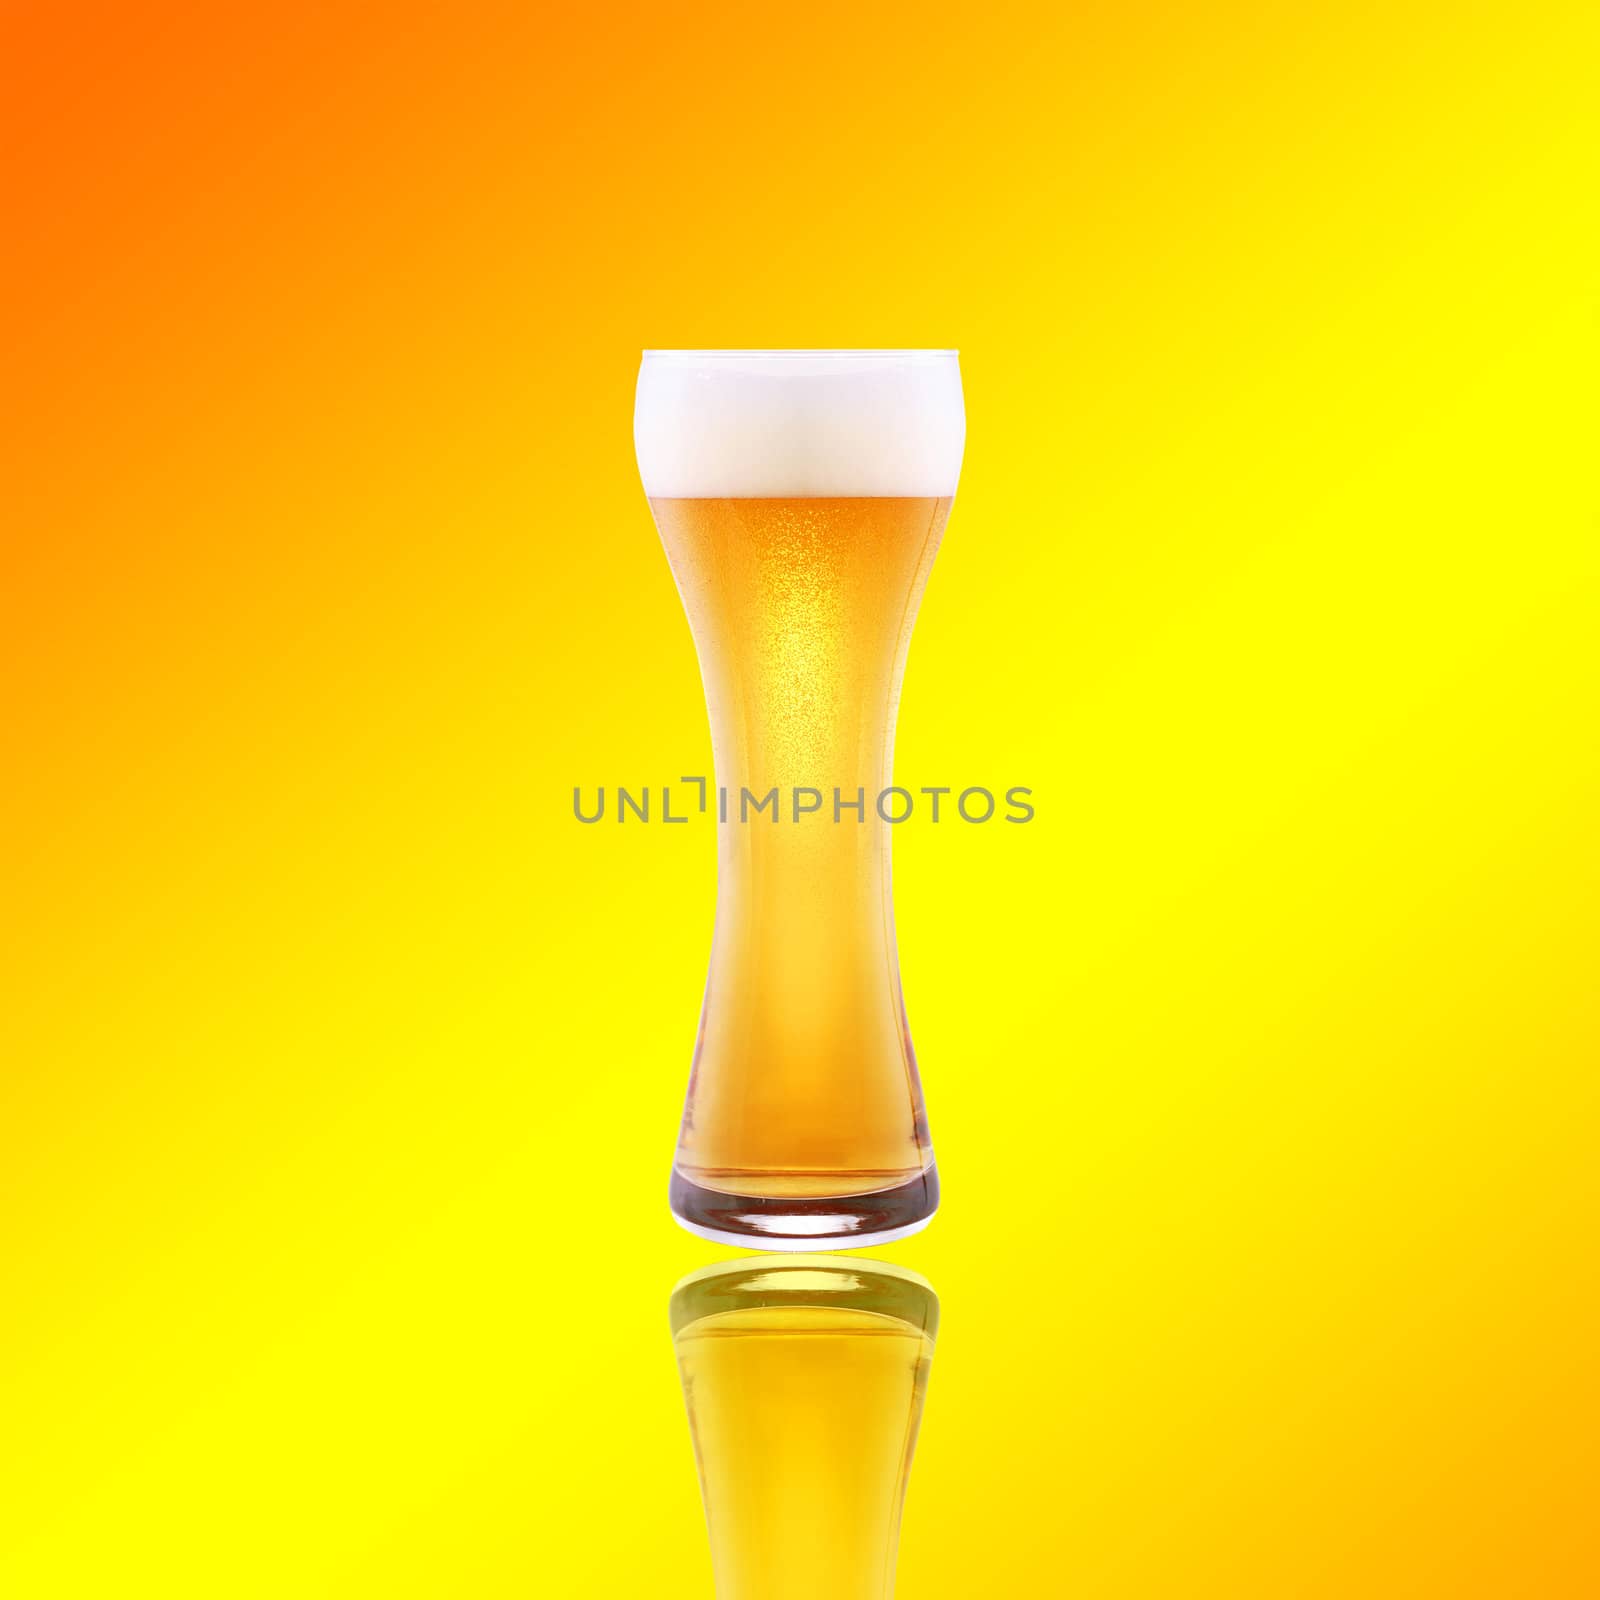 Beer glass with froth over yellow background by ozaiachin